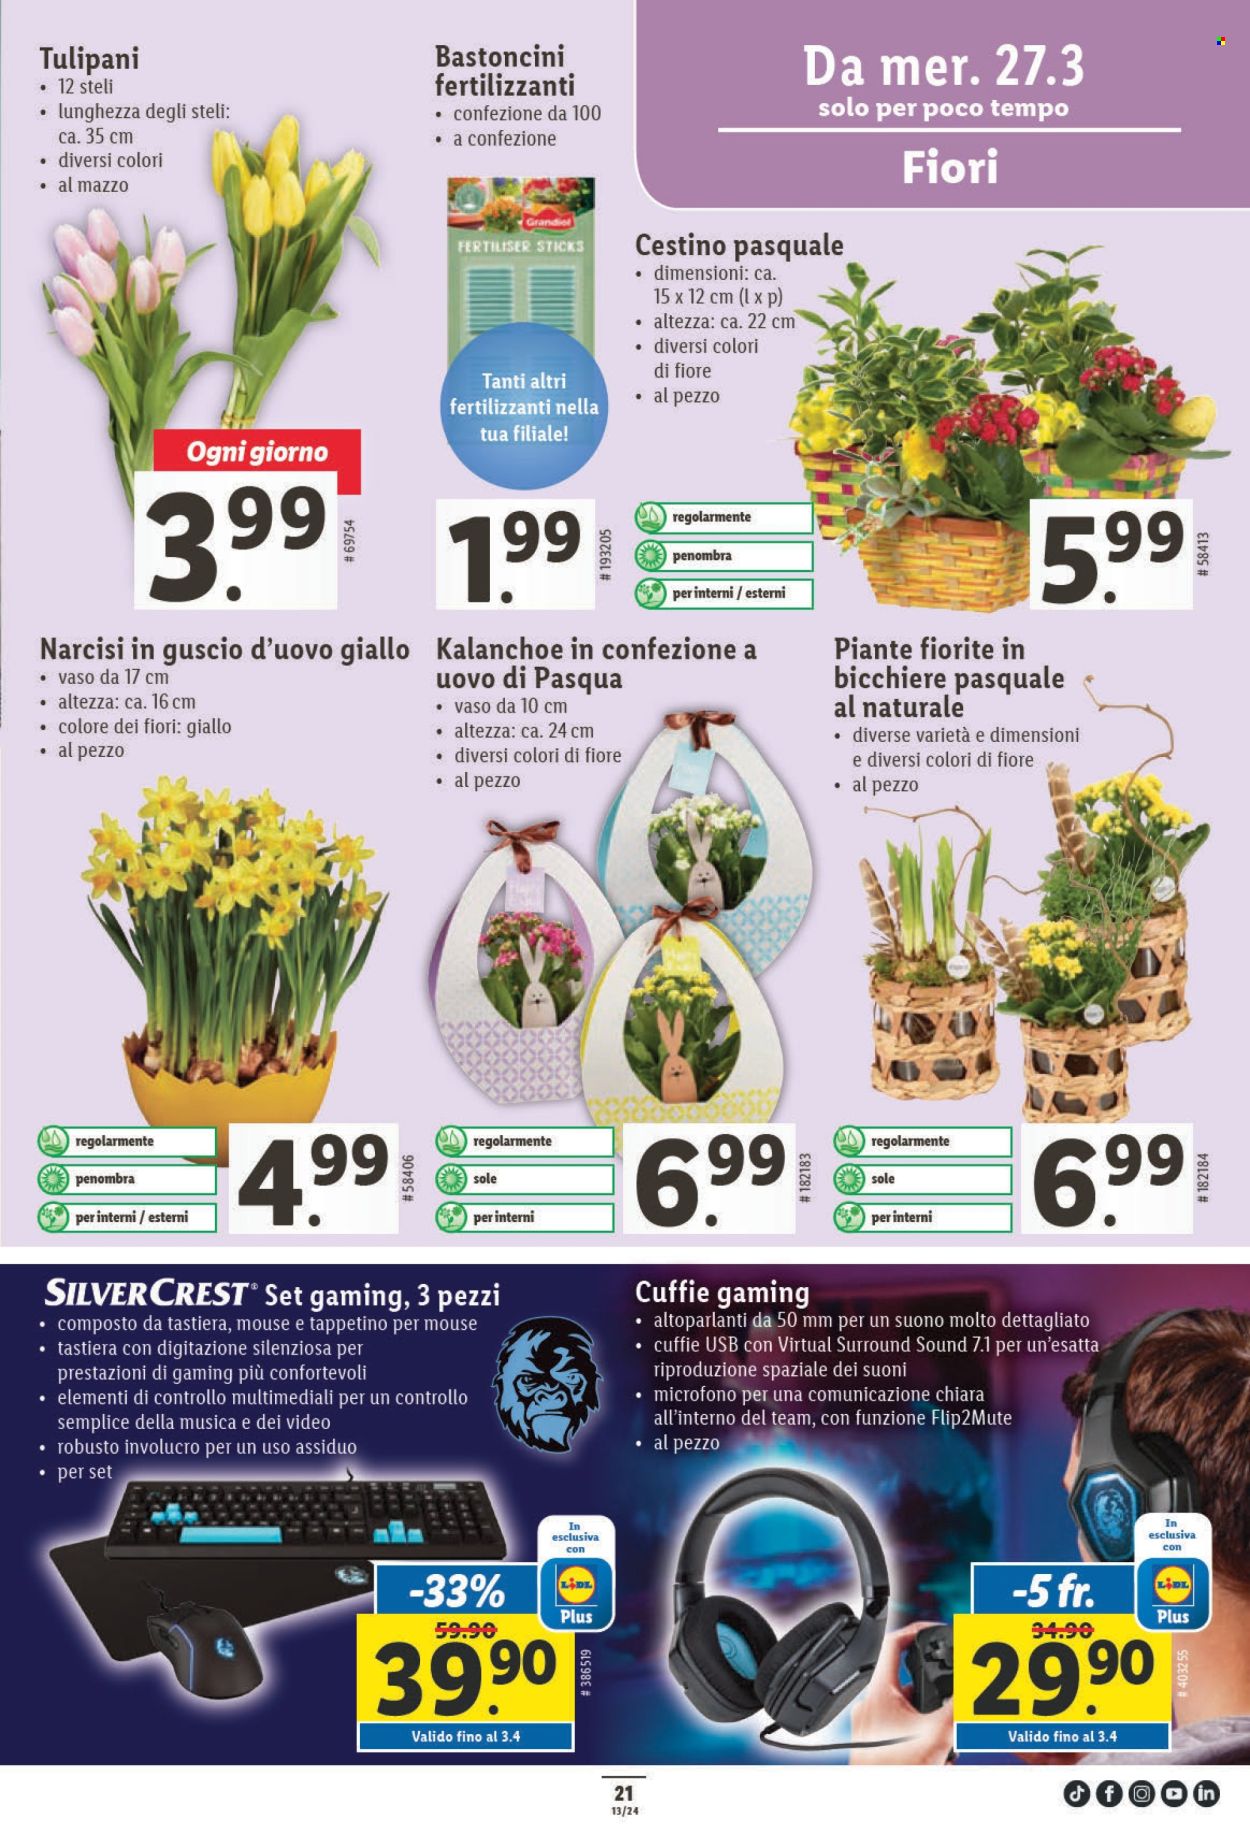 Catalogue Lidl - 27.3.2024 - 3.4.2024. Page 21.